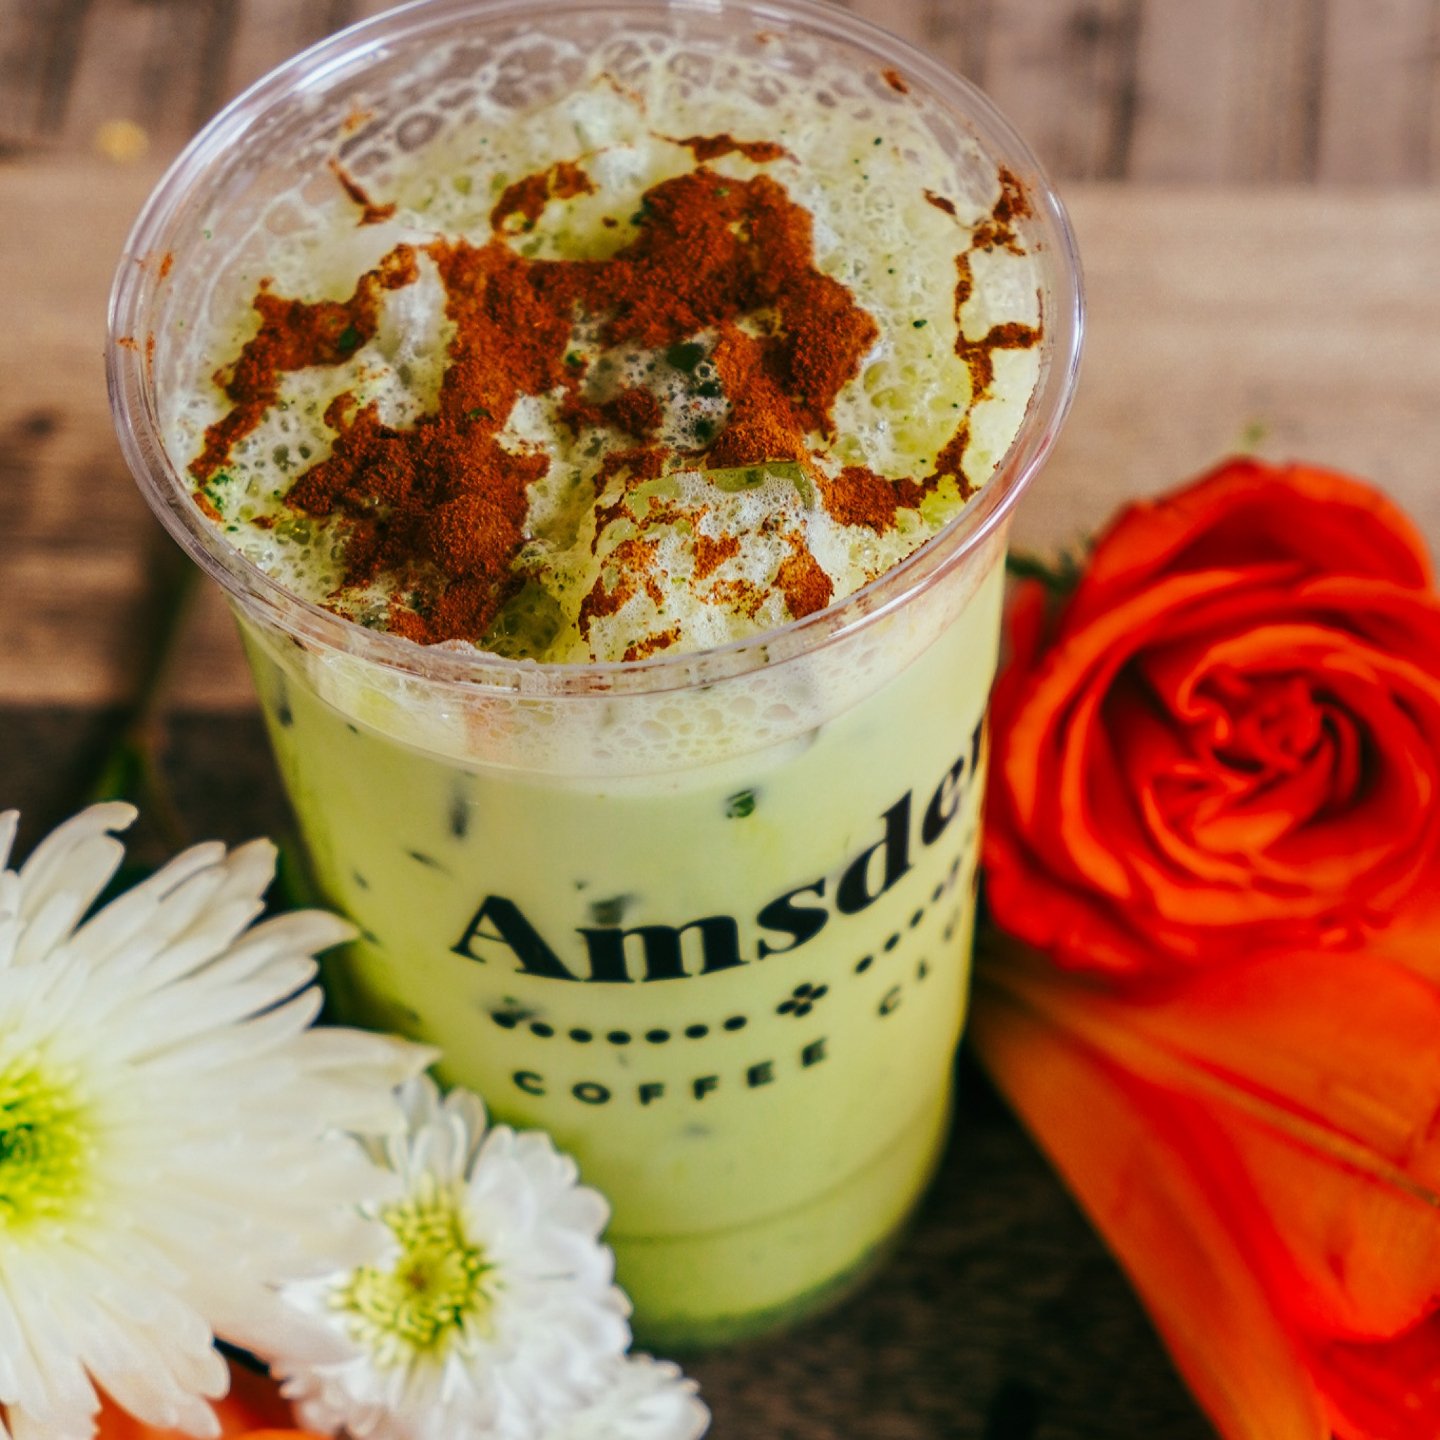 Monday mornings just got matcha better! 🍵✨ Start your week with our Iced Brown Sugar Cinnamon Matcha 🎉 Who said Mondays had to be boring? Let's spice things up a latte! 

#theamsden #amsden #amsdencoffeeclub #gathermercantile #sharethelex #versaill